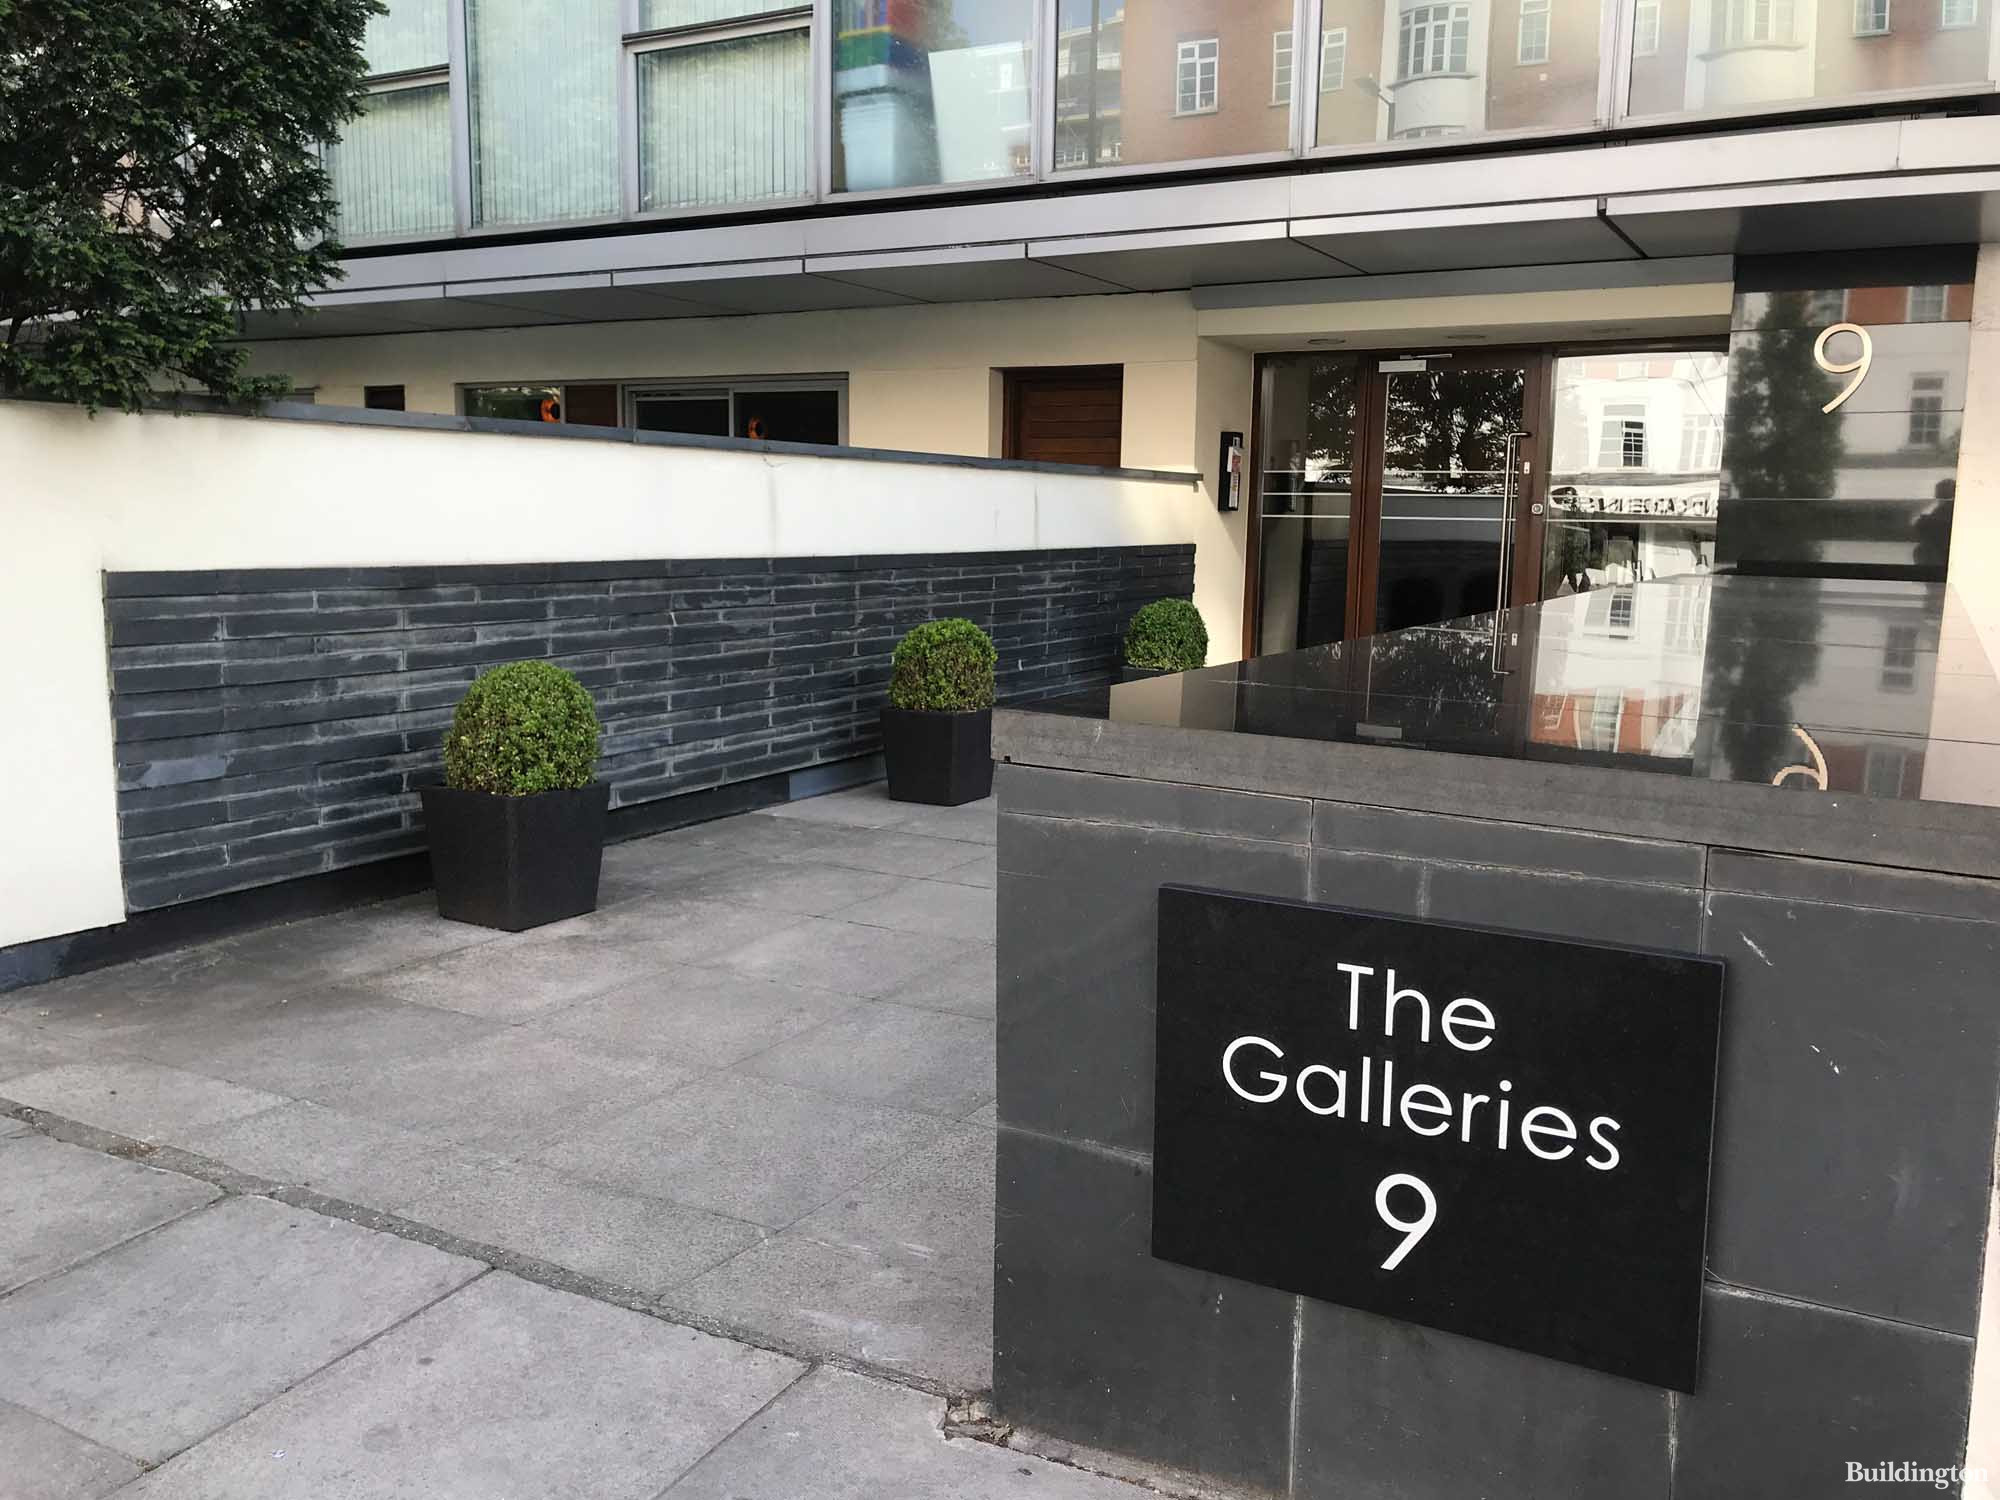 Entrance to The Galleries apartments at 9 Abbey Road in St John's Wood, London NW8.